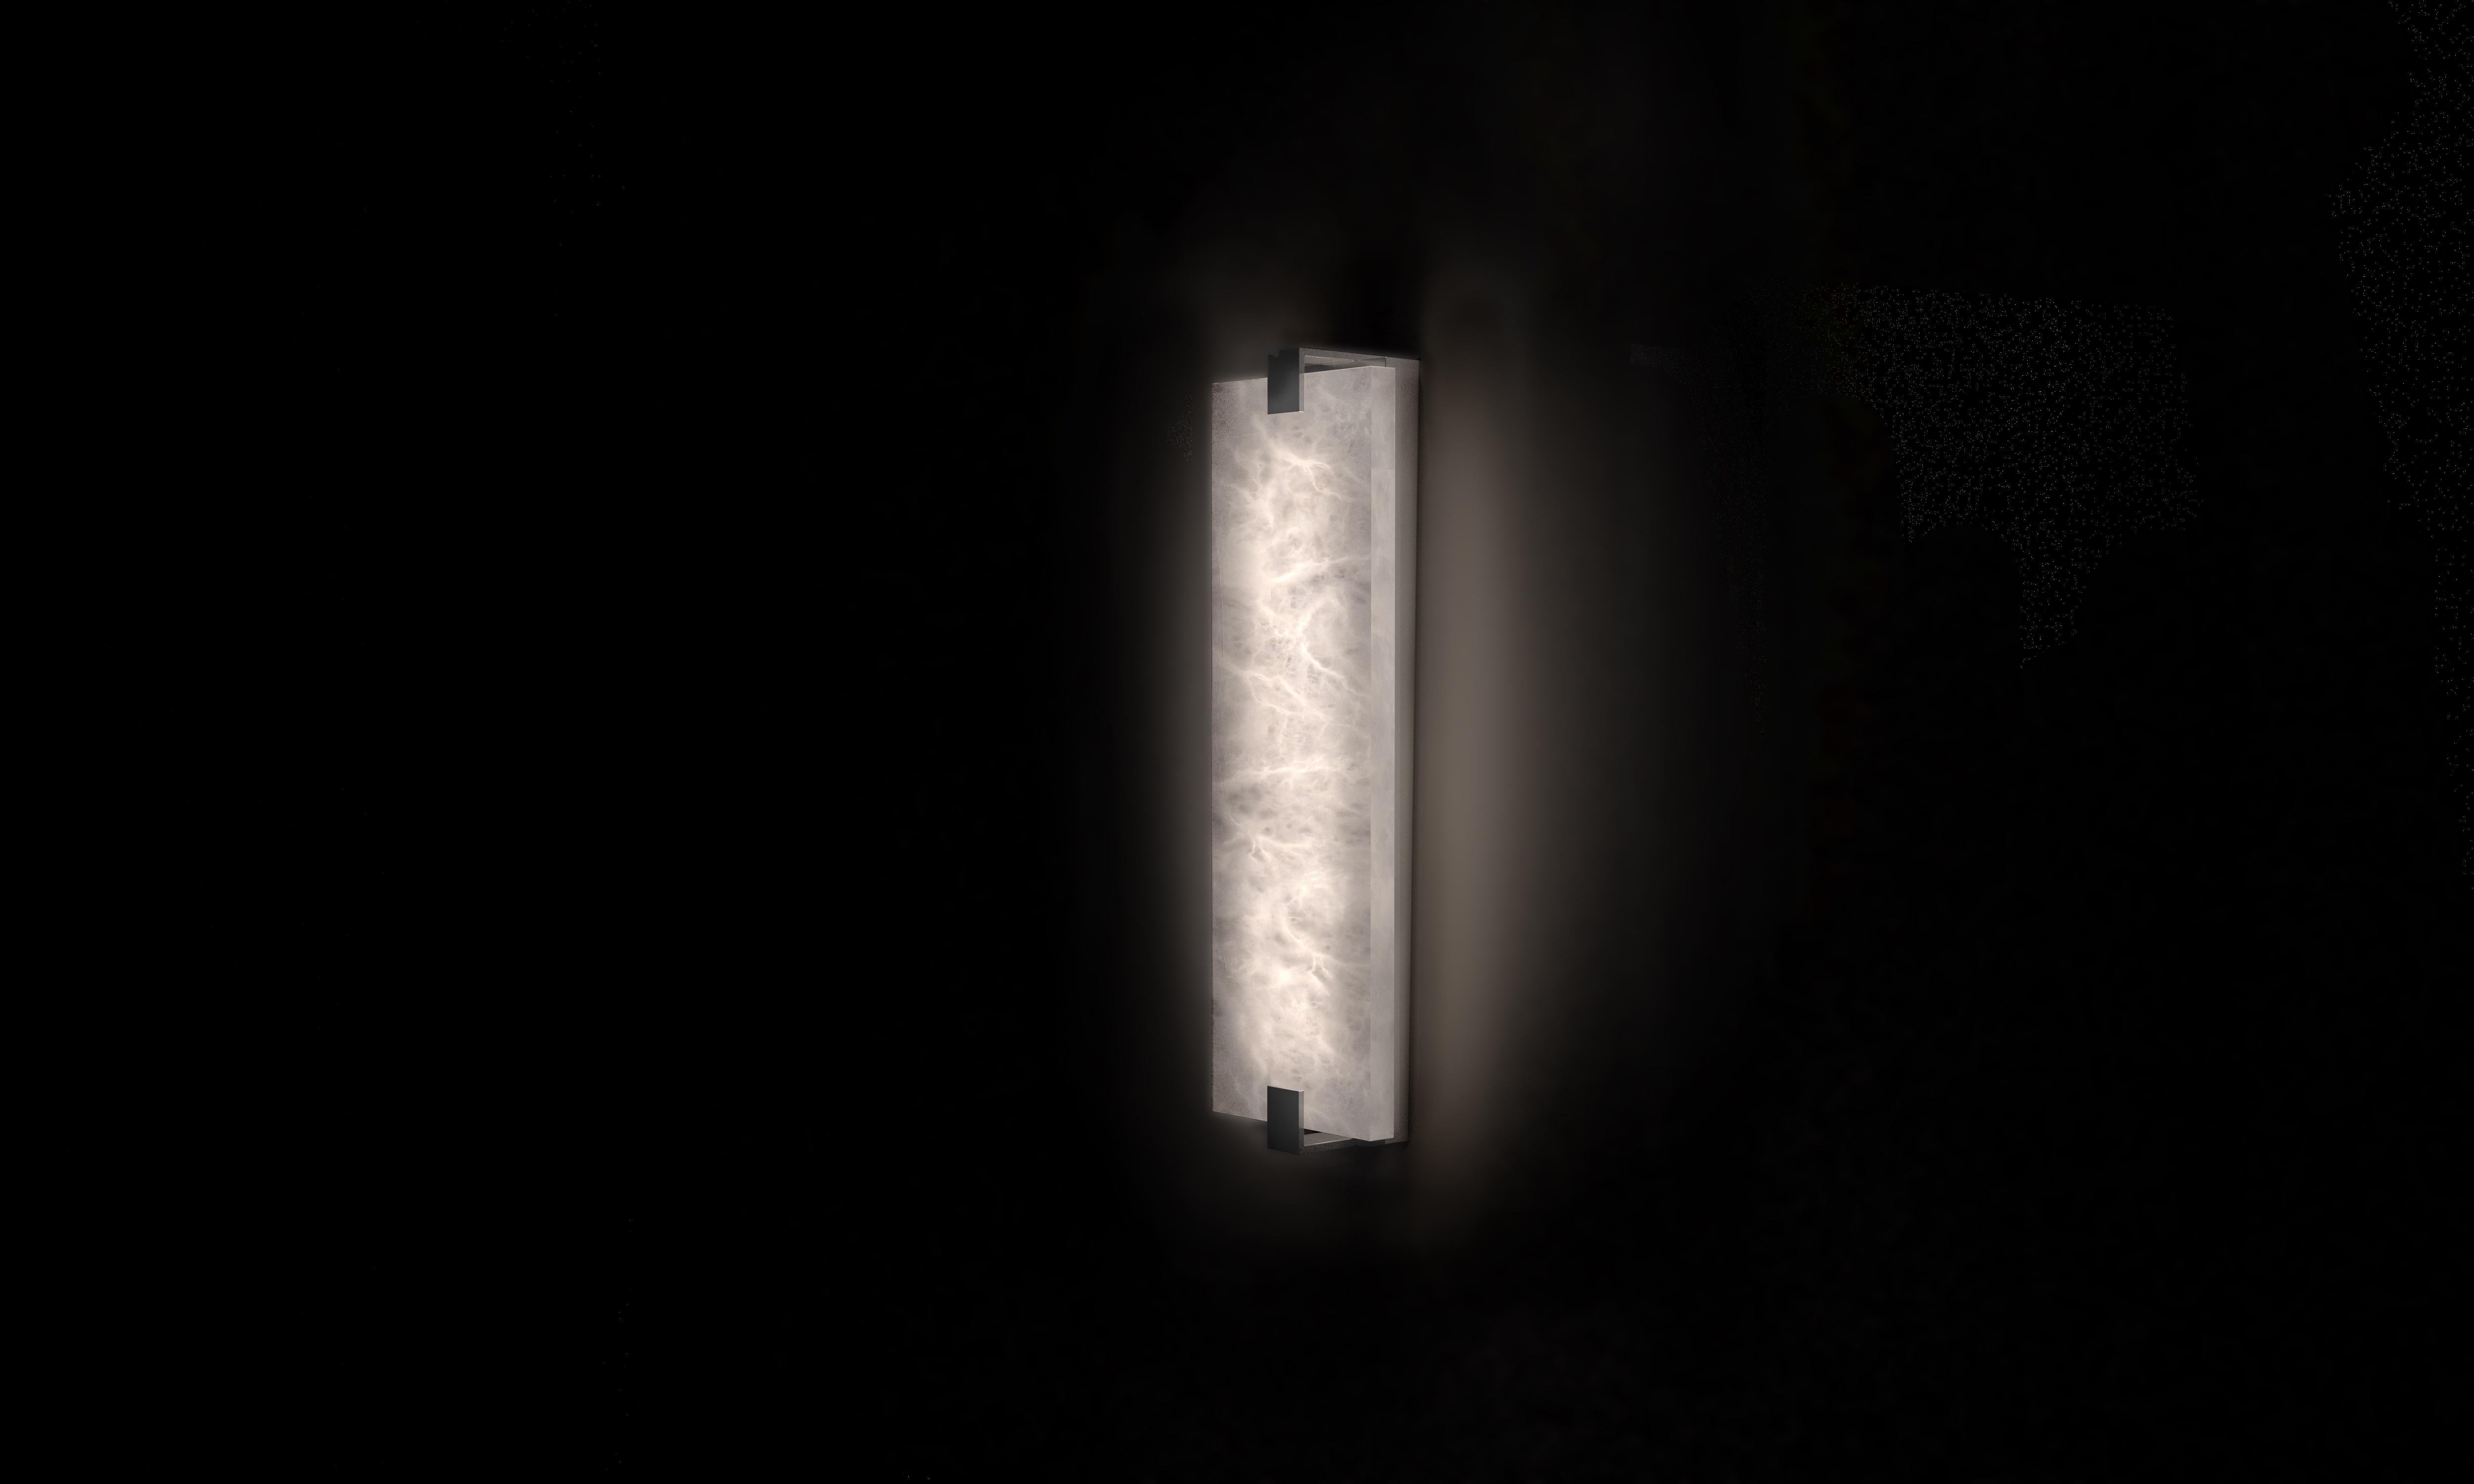 Small Kinkairo Wall Lamp by Alabastro Italiano
Dimensions: D 8 x W 15 x H 50 cm.
Materials: White alabaster, metal (Shiny Silver).
Available in other finishes and sizes.

1 x Strip LED
21.6 W/m

All our lamps can be wired according to each country.